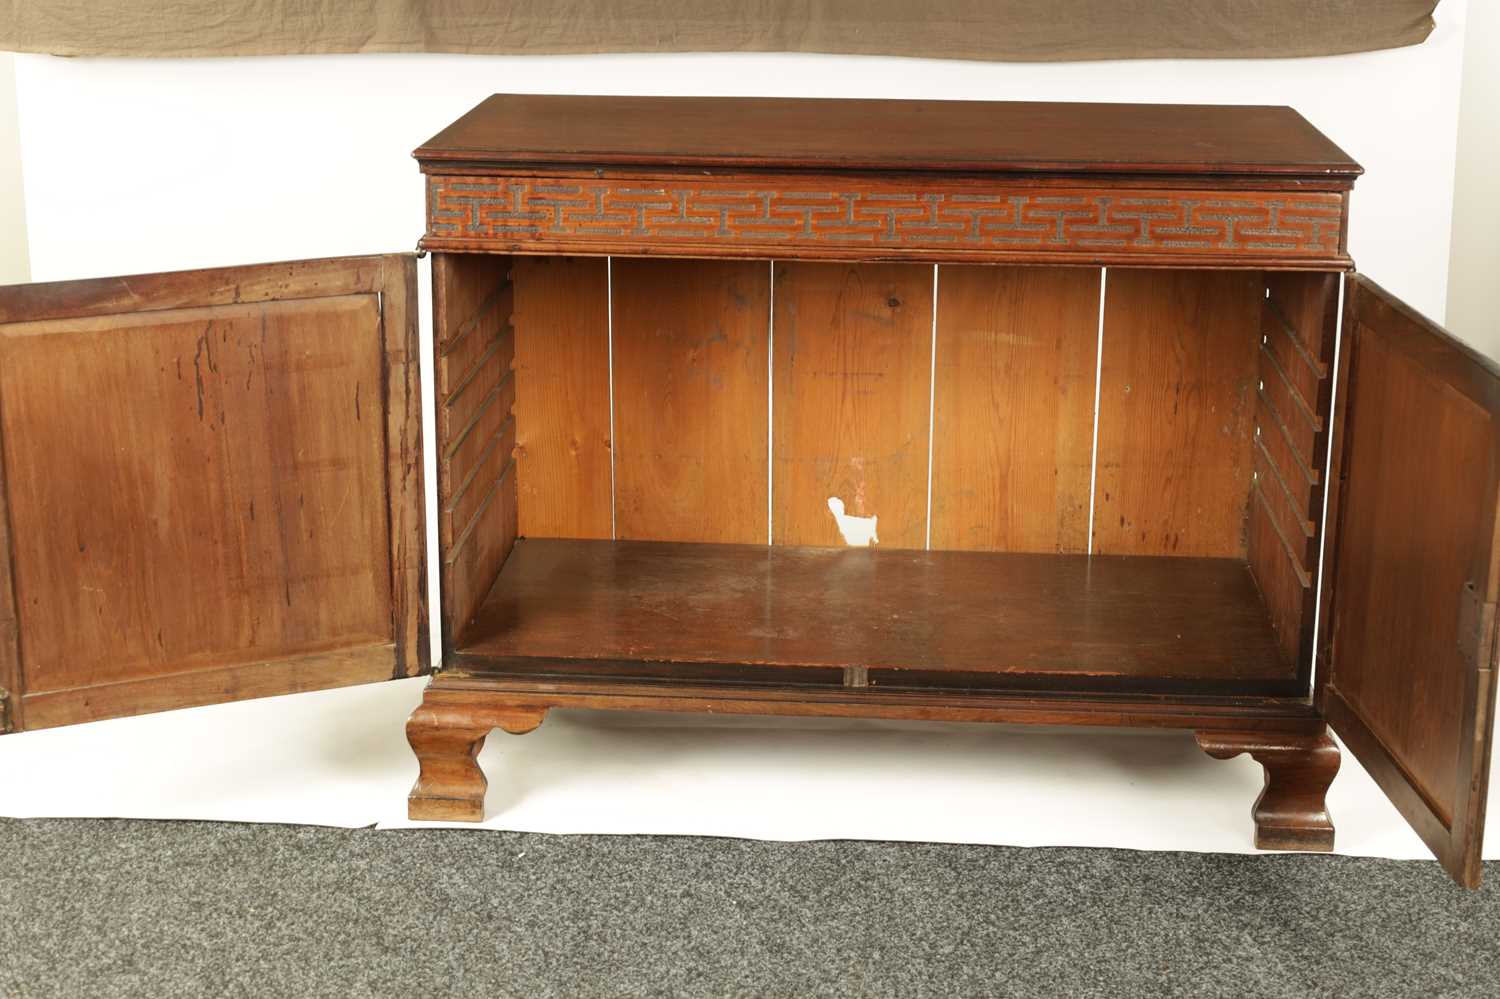 AN UNUSUAL MID 18TH CENTURY CHIPPENDALE DESIGN MAHOGANY FOLIO CABINET - Image 3 of 18